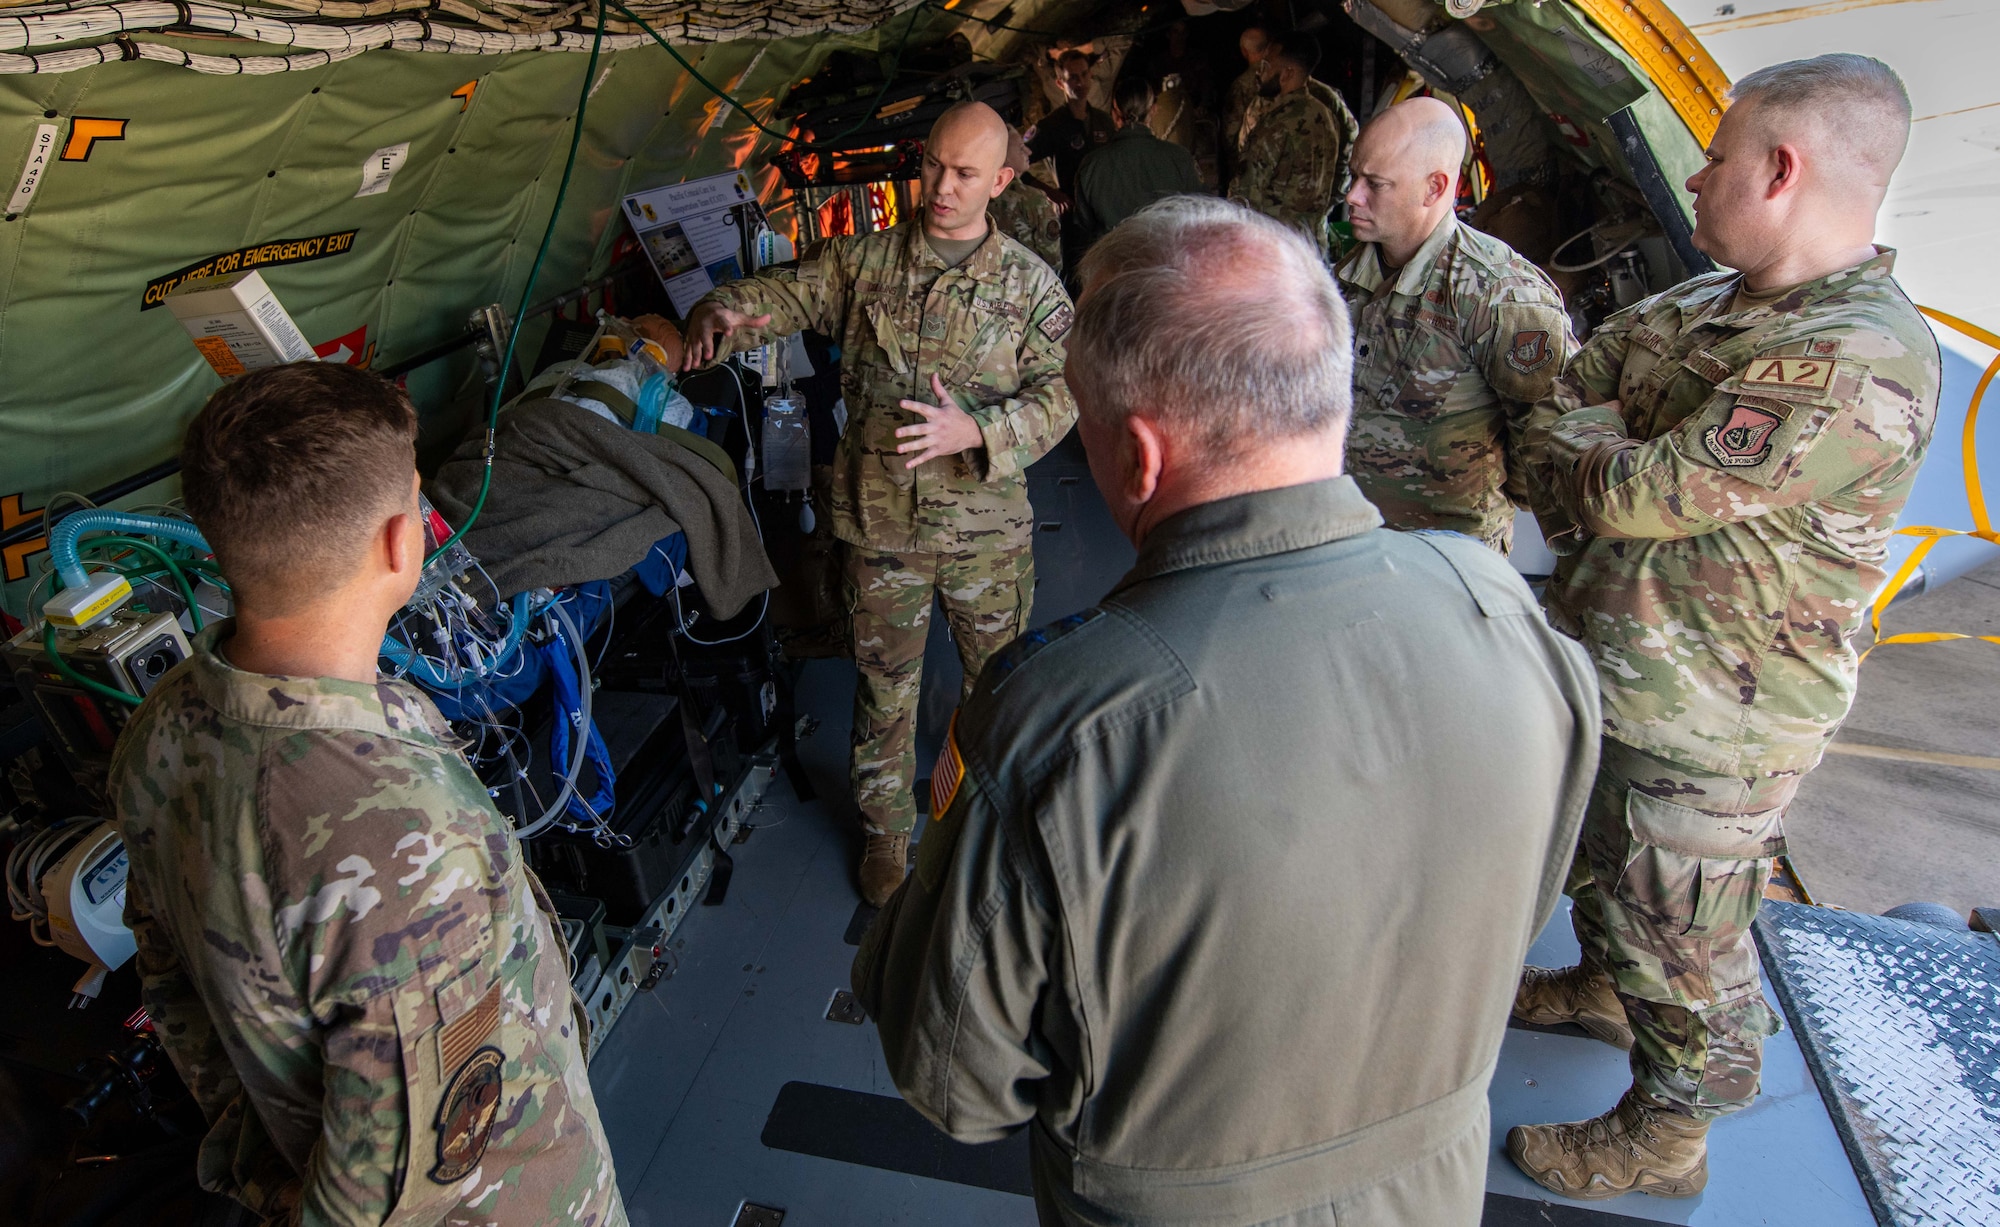 A group discusses aeromedical operations.